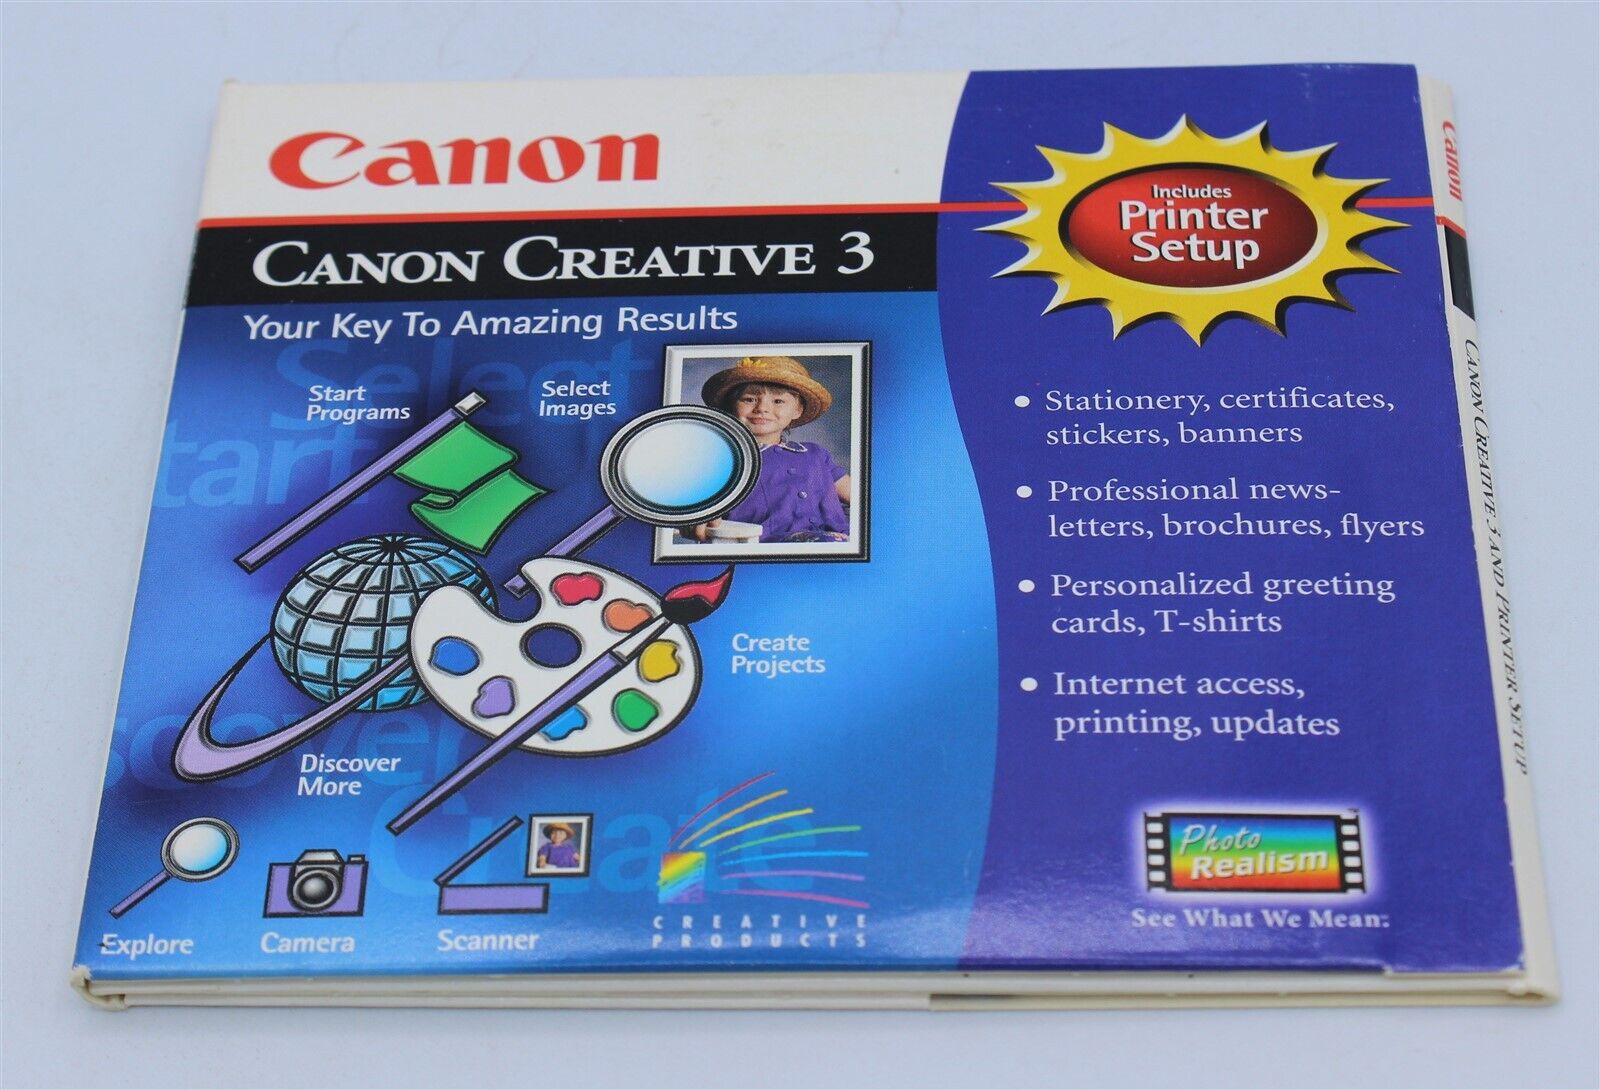 Canon Creative 3 - For Windows 95, 98 and 3.1